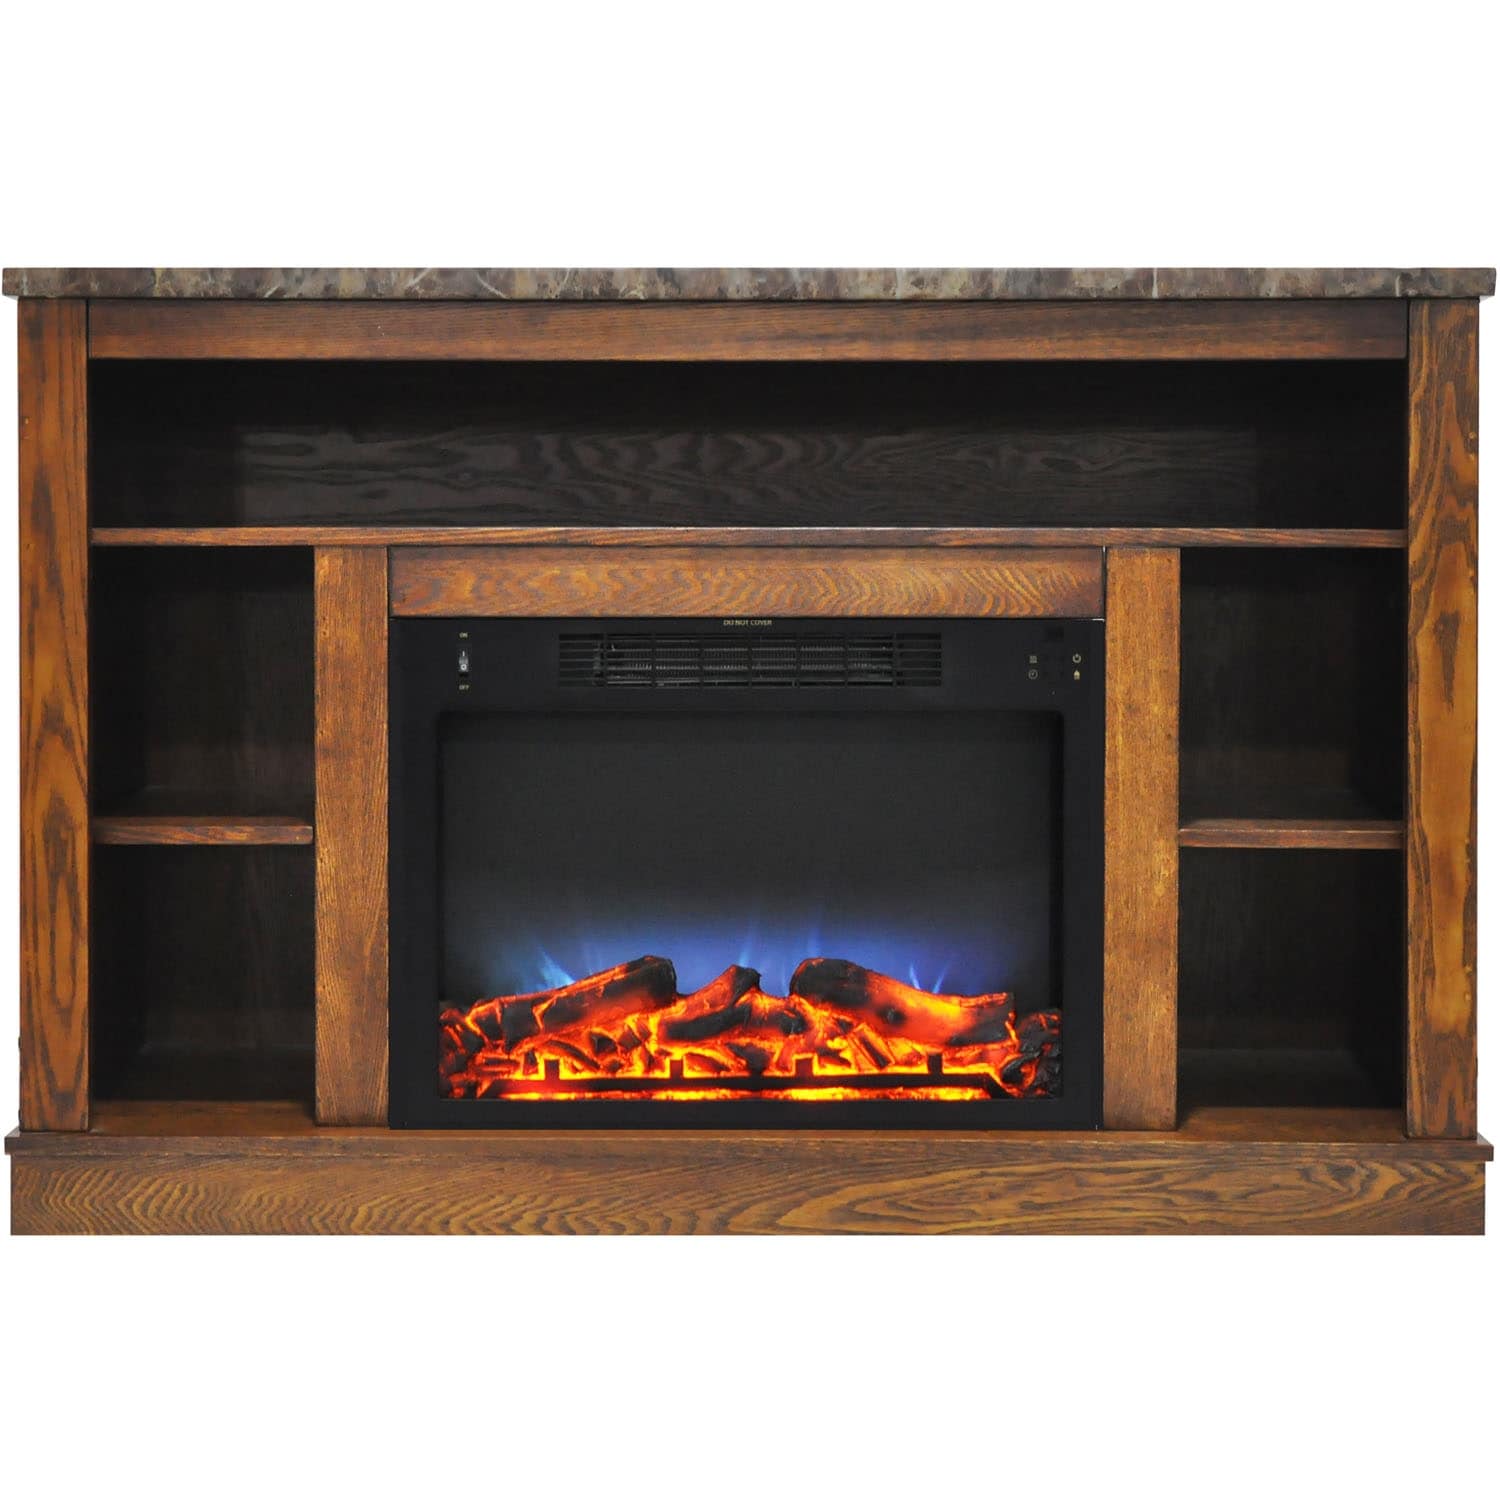 Cambridge 47 In. Electric Fireplace with a Multi-Color LED Insert and Walnut Mantel